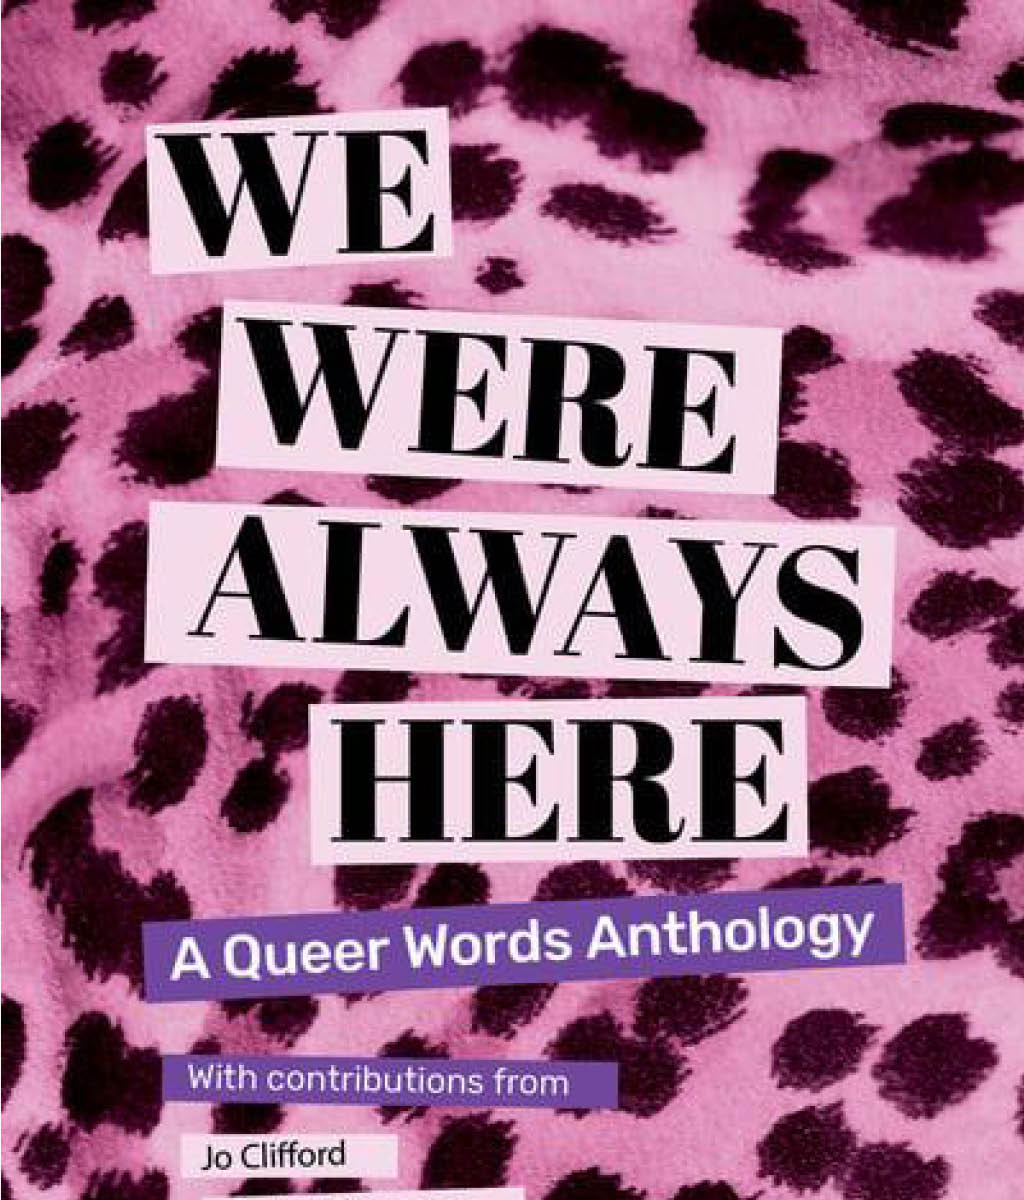 We Were Always Here: A Queer Words Anthology by Ryan Vance